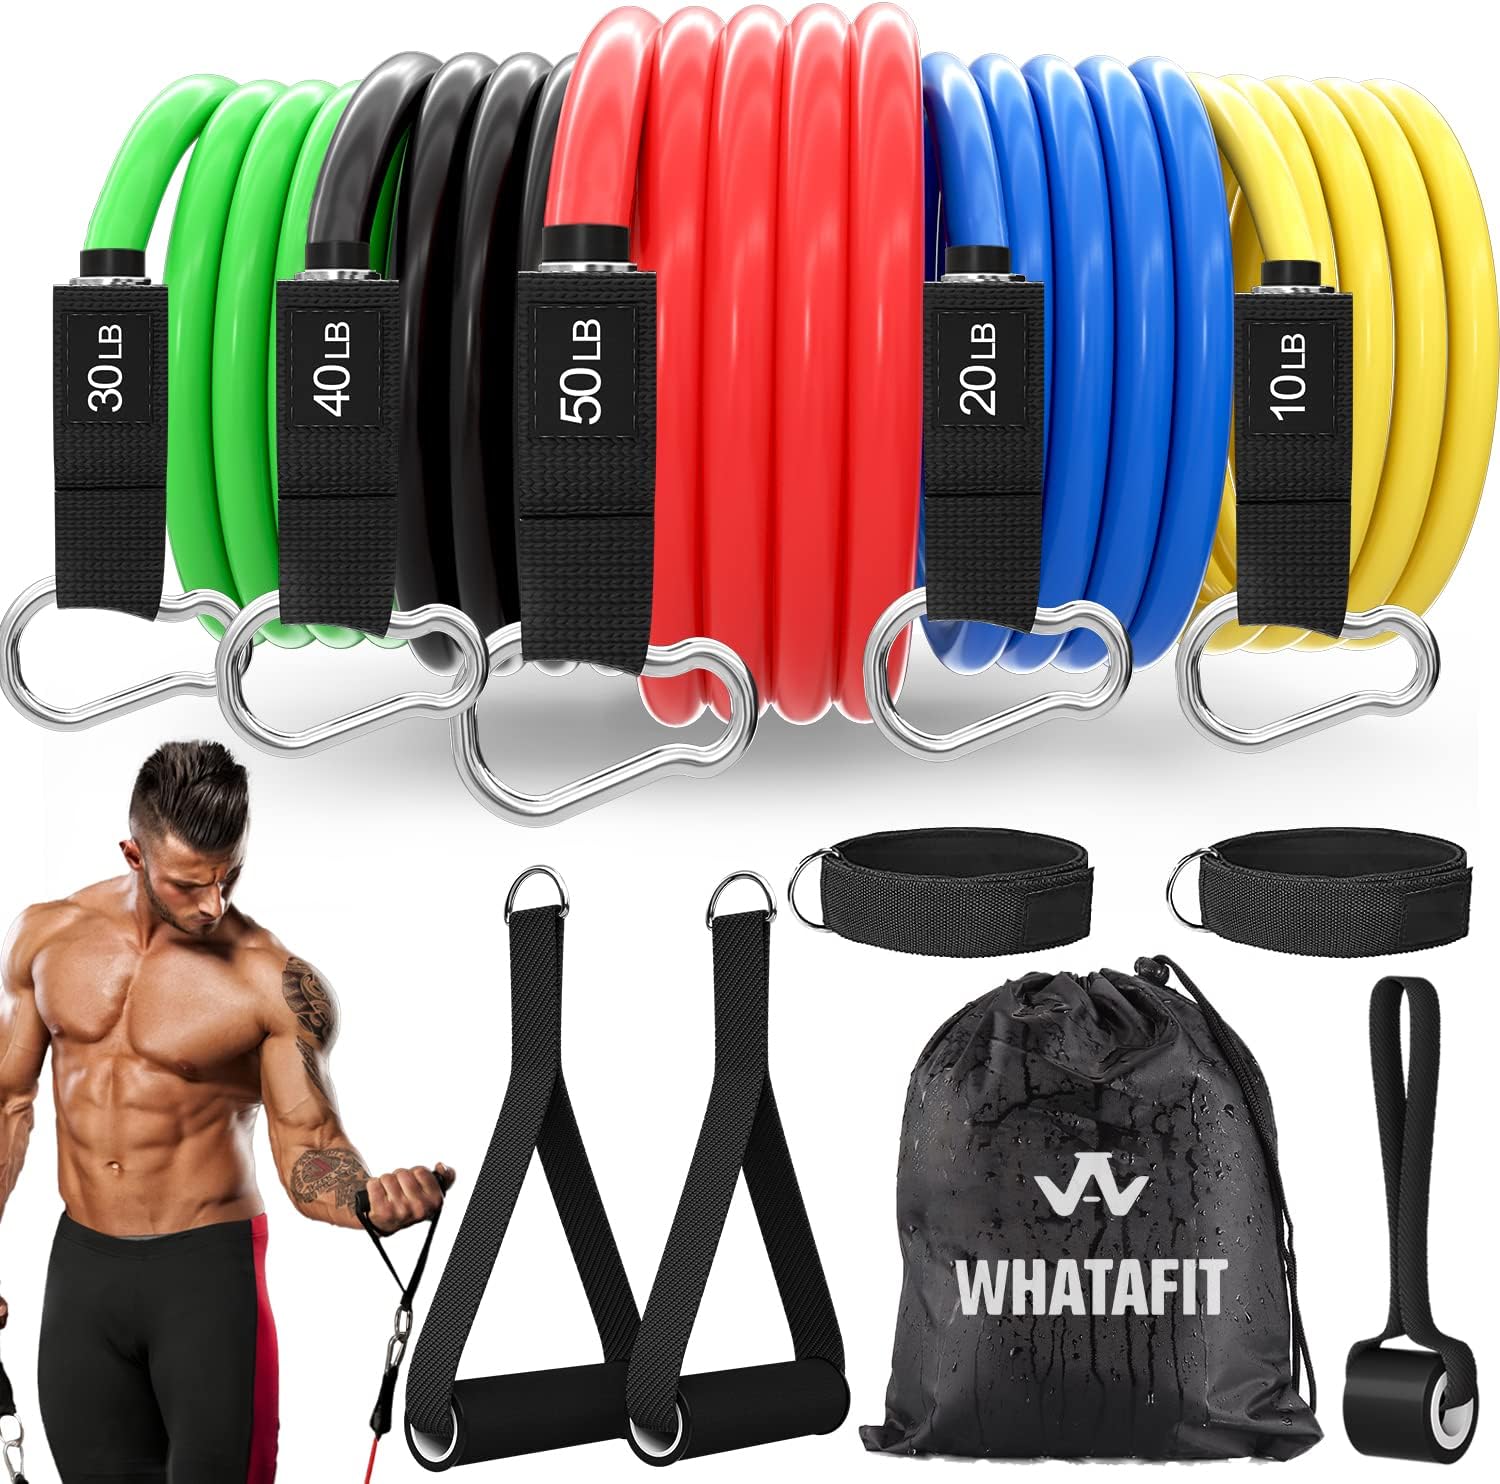 Whatafit Resistance Bands Set with Accessories